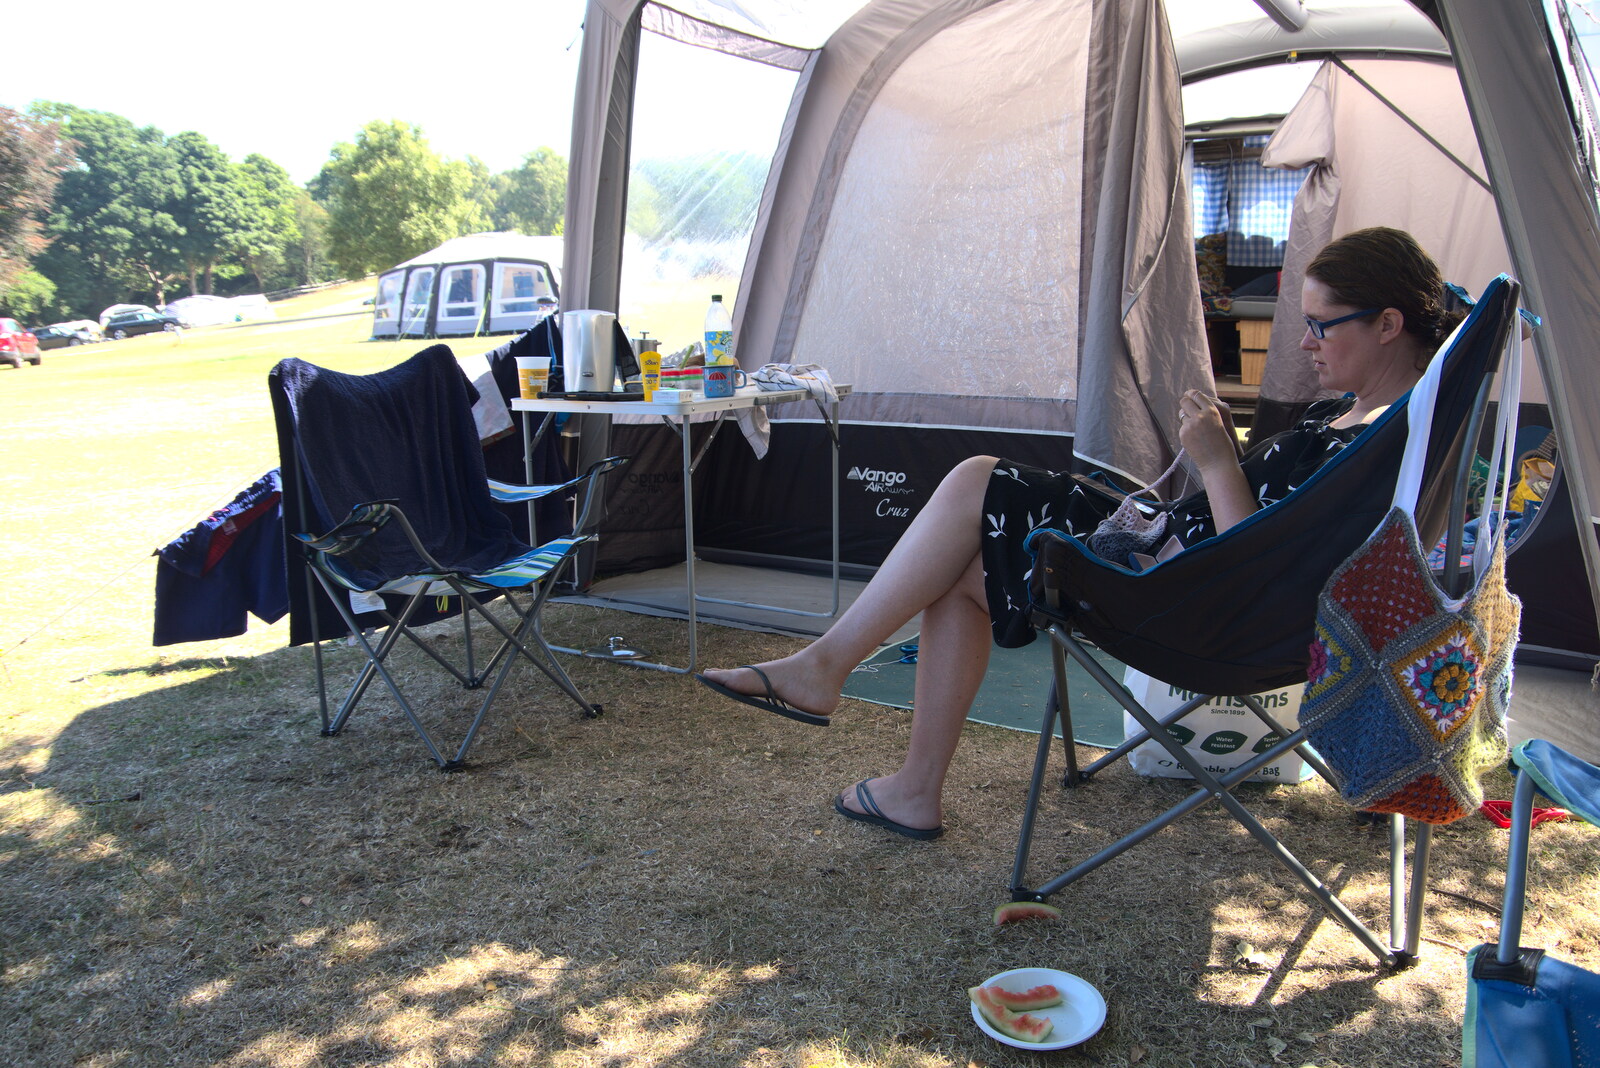 Isobel does some crochet in the awning from Camping at Forest Park, Cromer, Norfolk - 12th August 2022